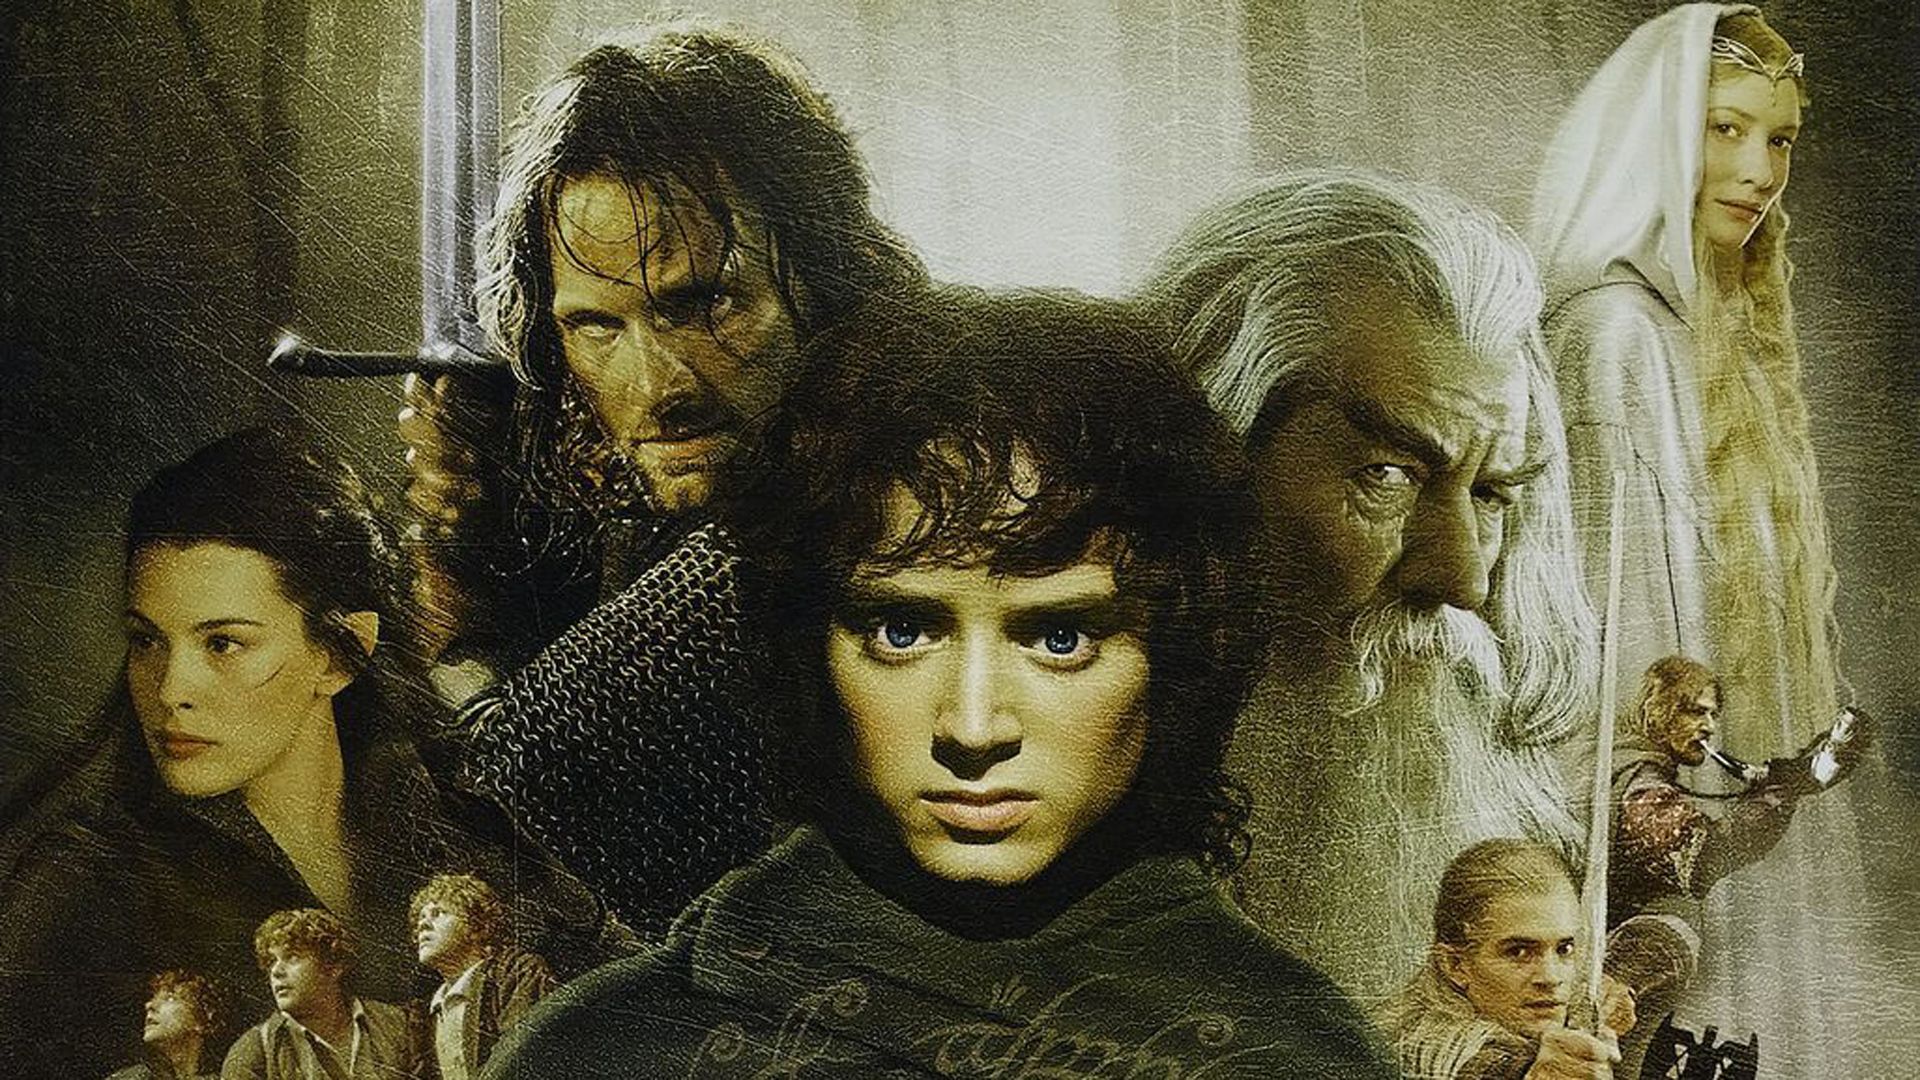 The Lord of the Rings HD Wallpaper 1920x1080 ID26777